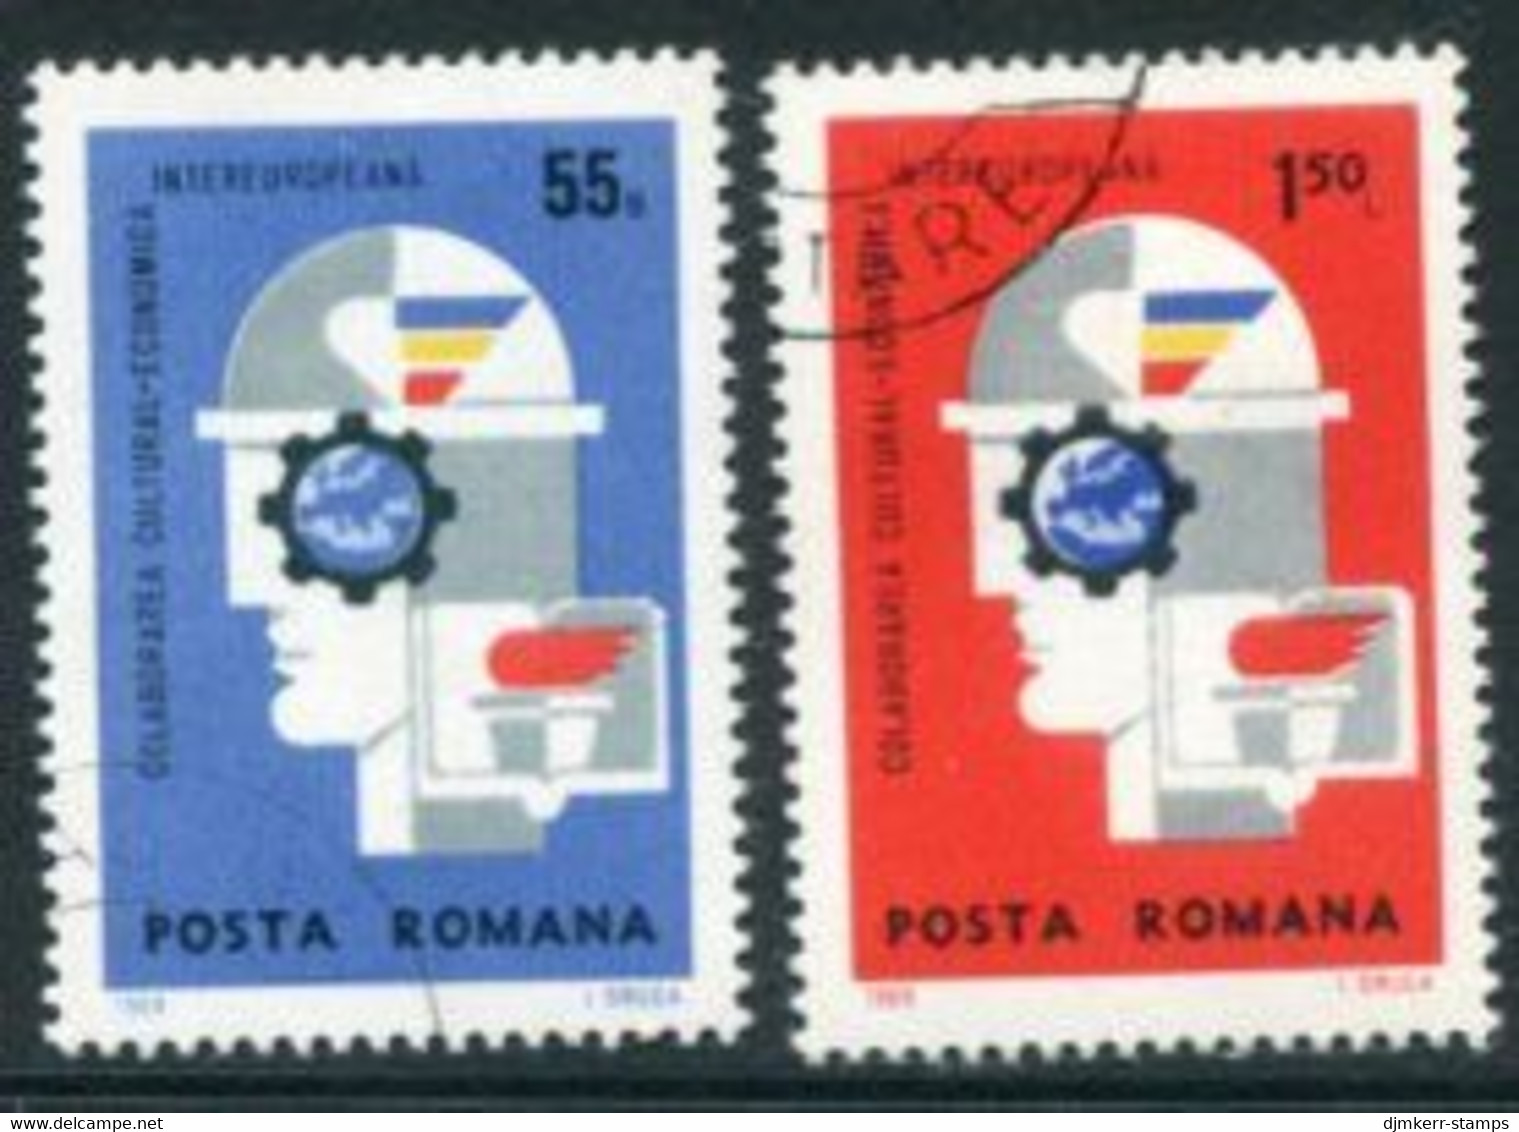 ROMANIA 1969 INTEREUROPA Used  Michel 2764-65 - Used Stamps